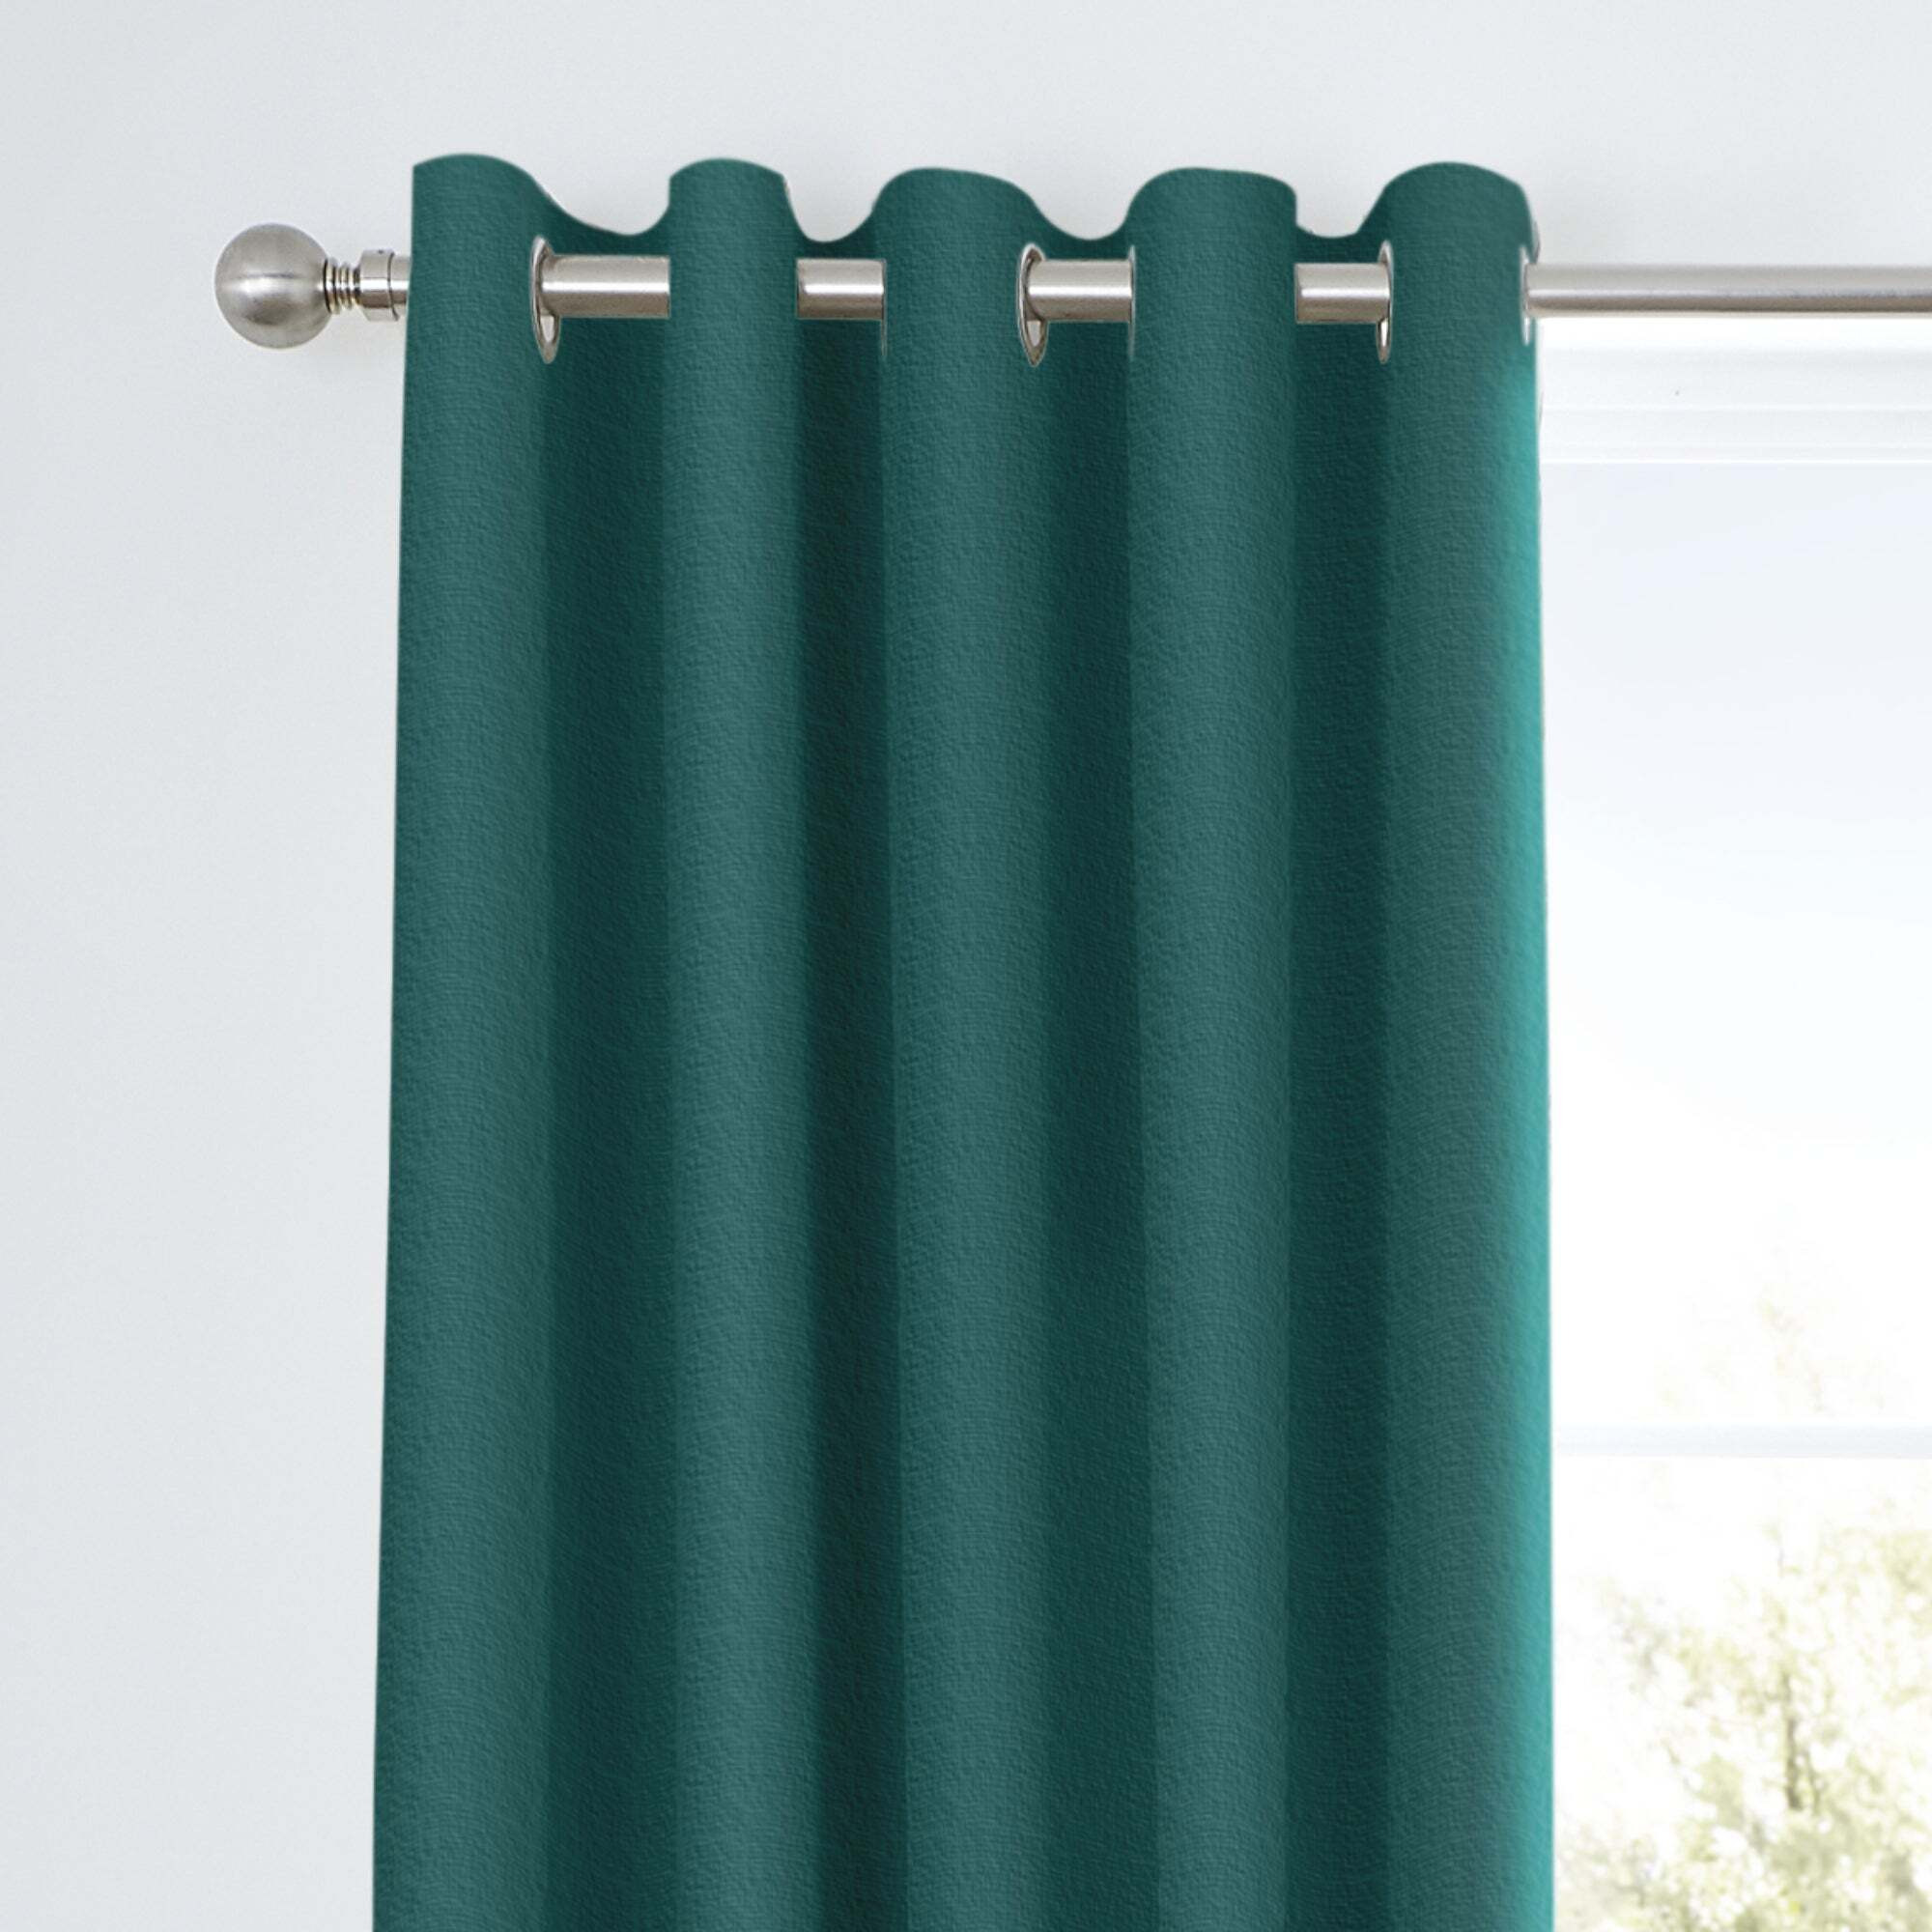 Tyla Teal Eyelet Blackout Curtains Green